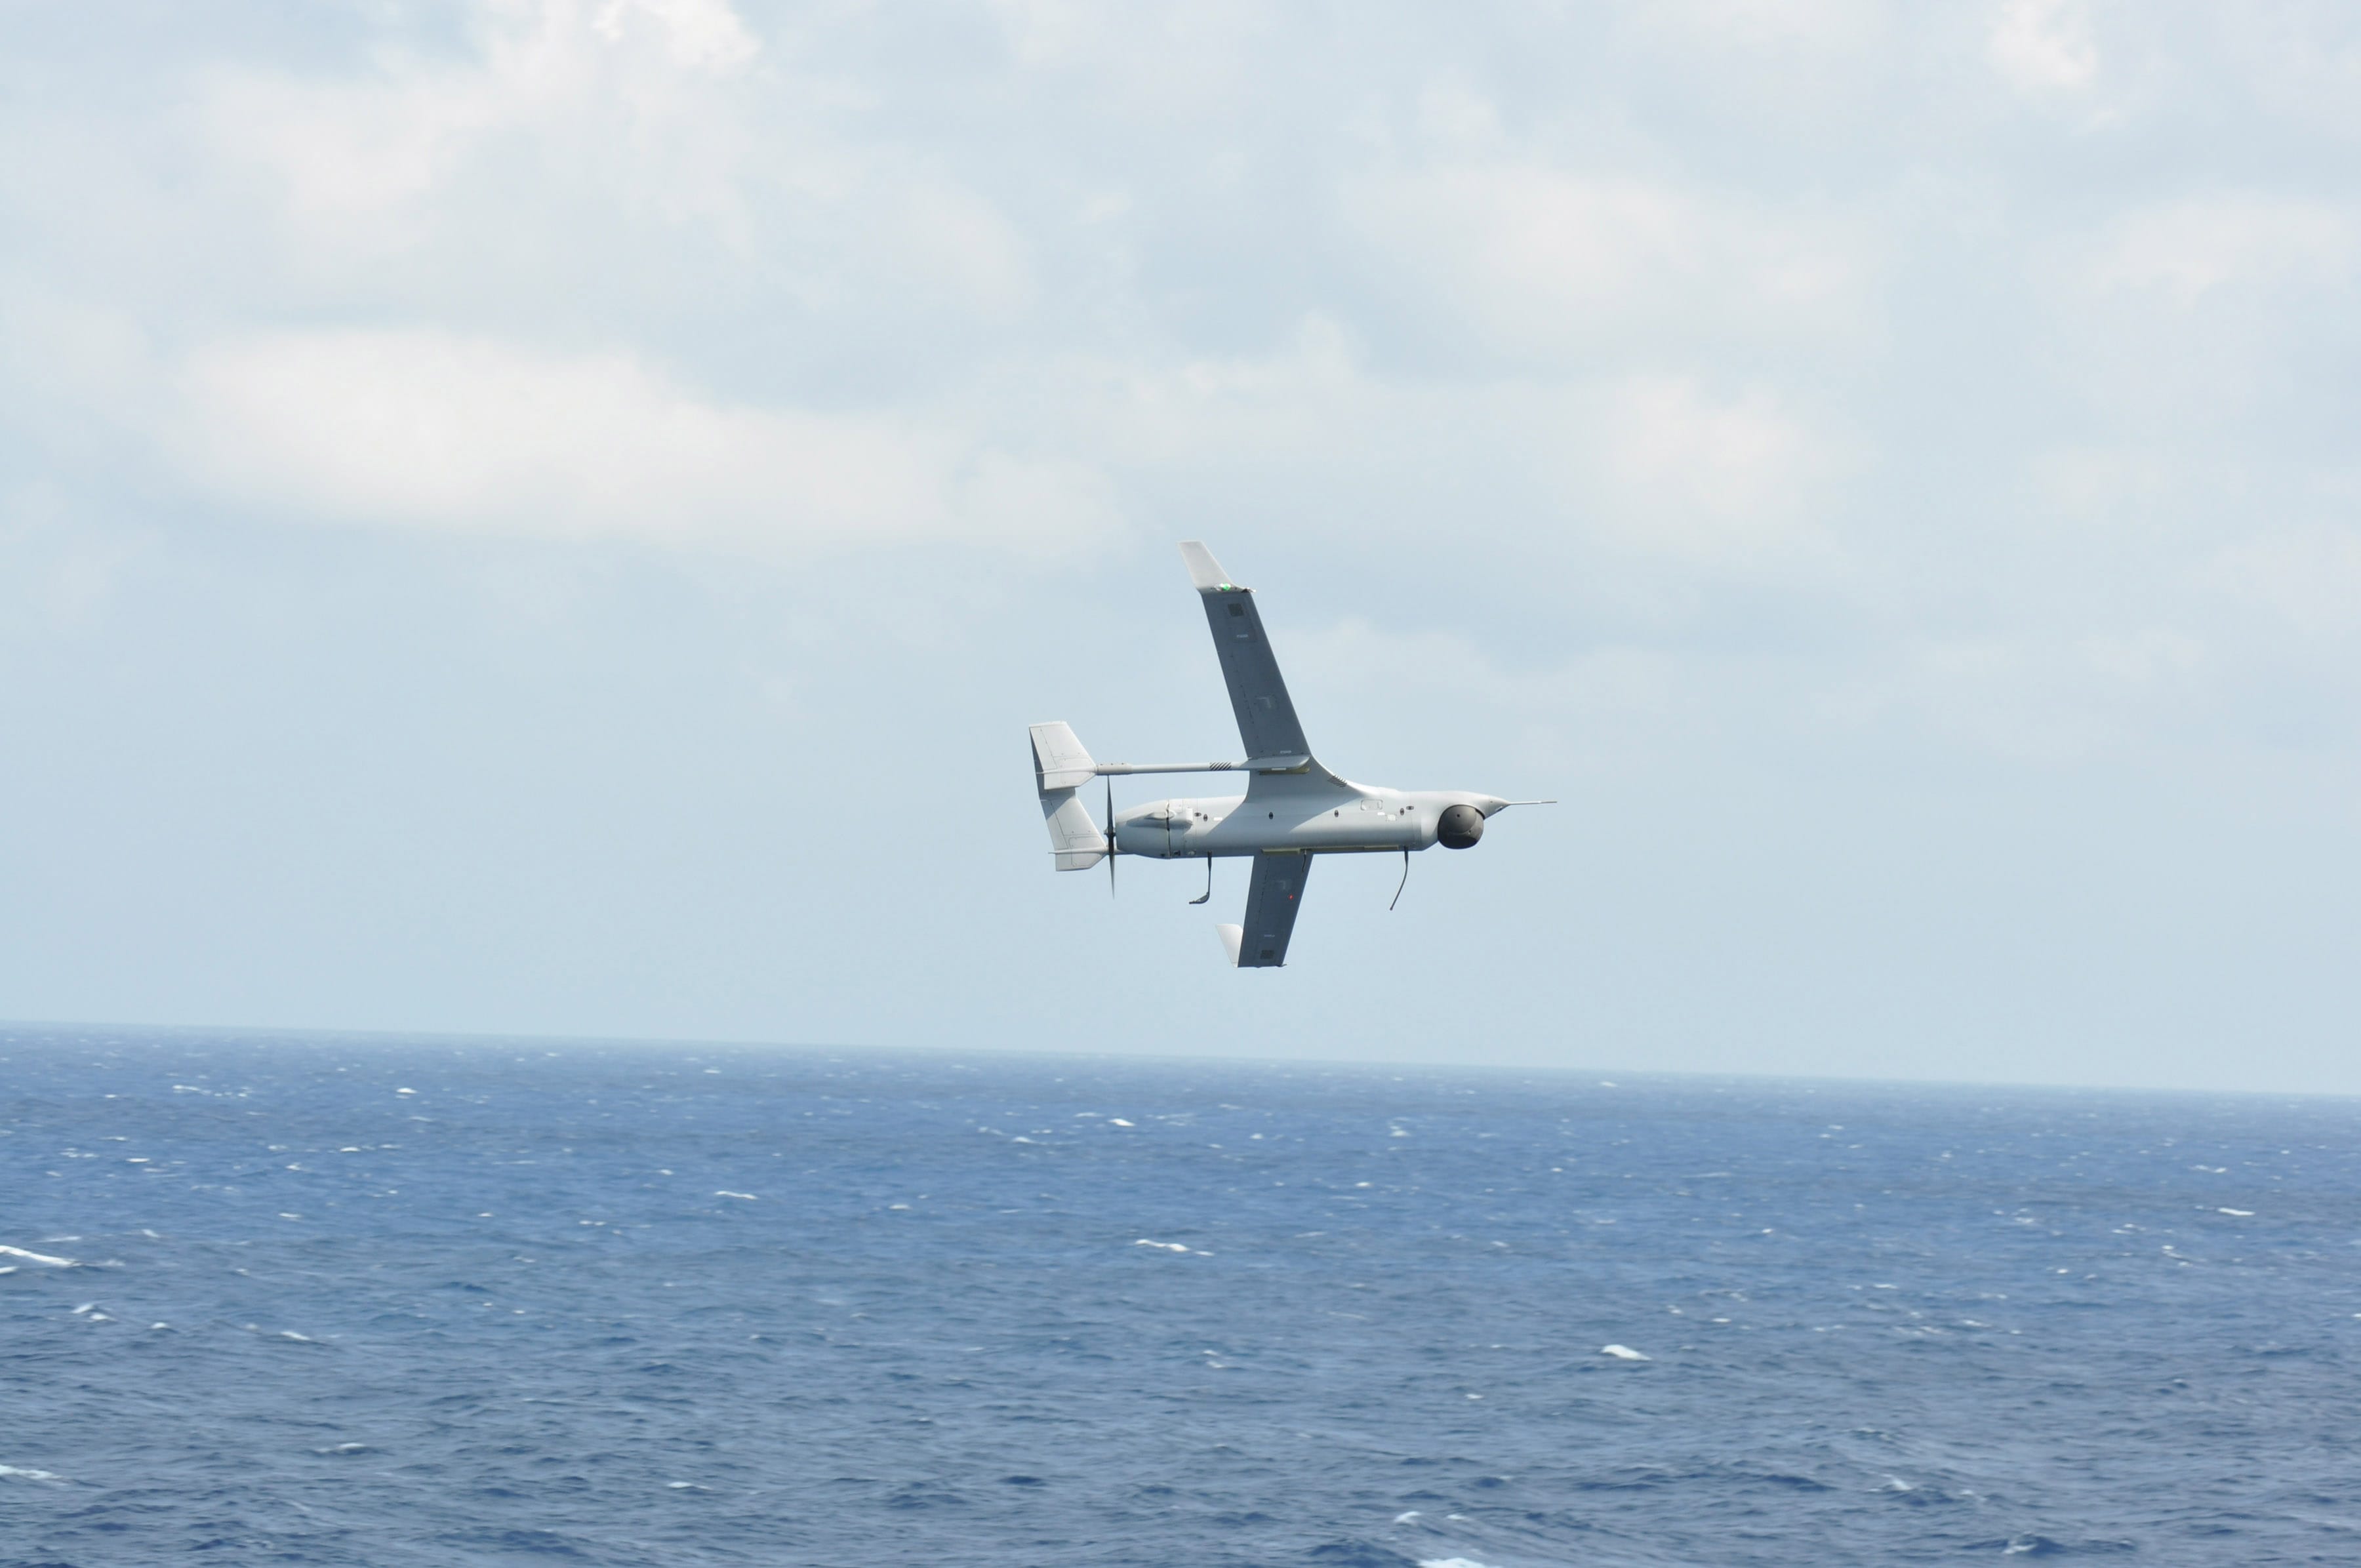 Insitu has landed a $41.07 million Navy contract to supply three RQ-21A Blackjack unmanned aircraft systems.